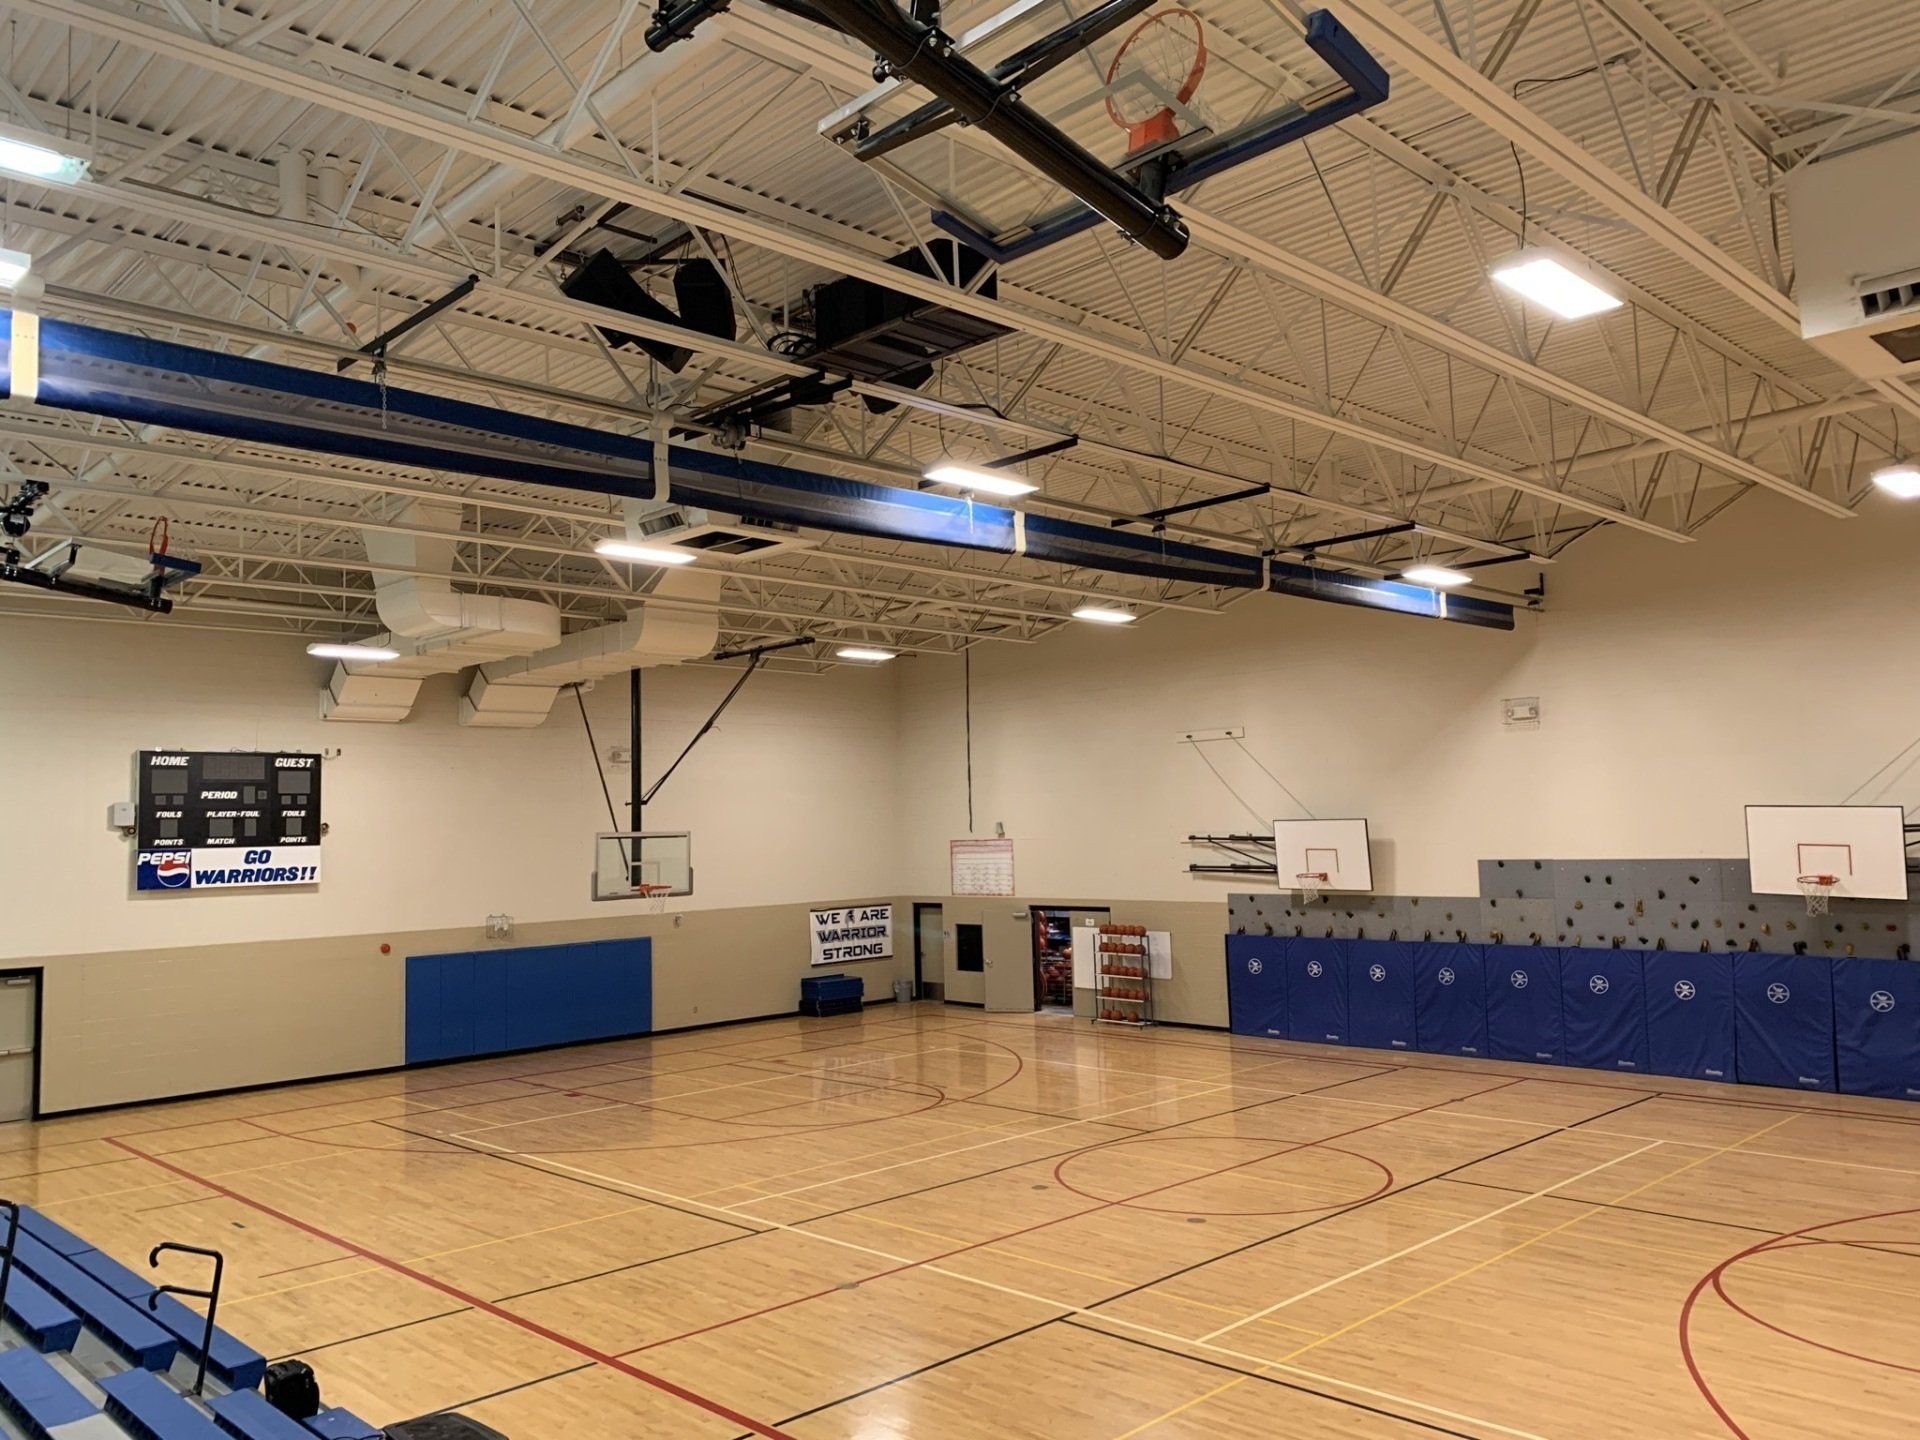 An empty gym with a basketball hoop and a scoreboard.